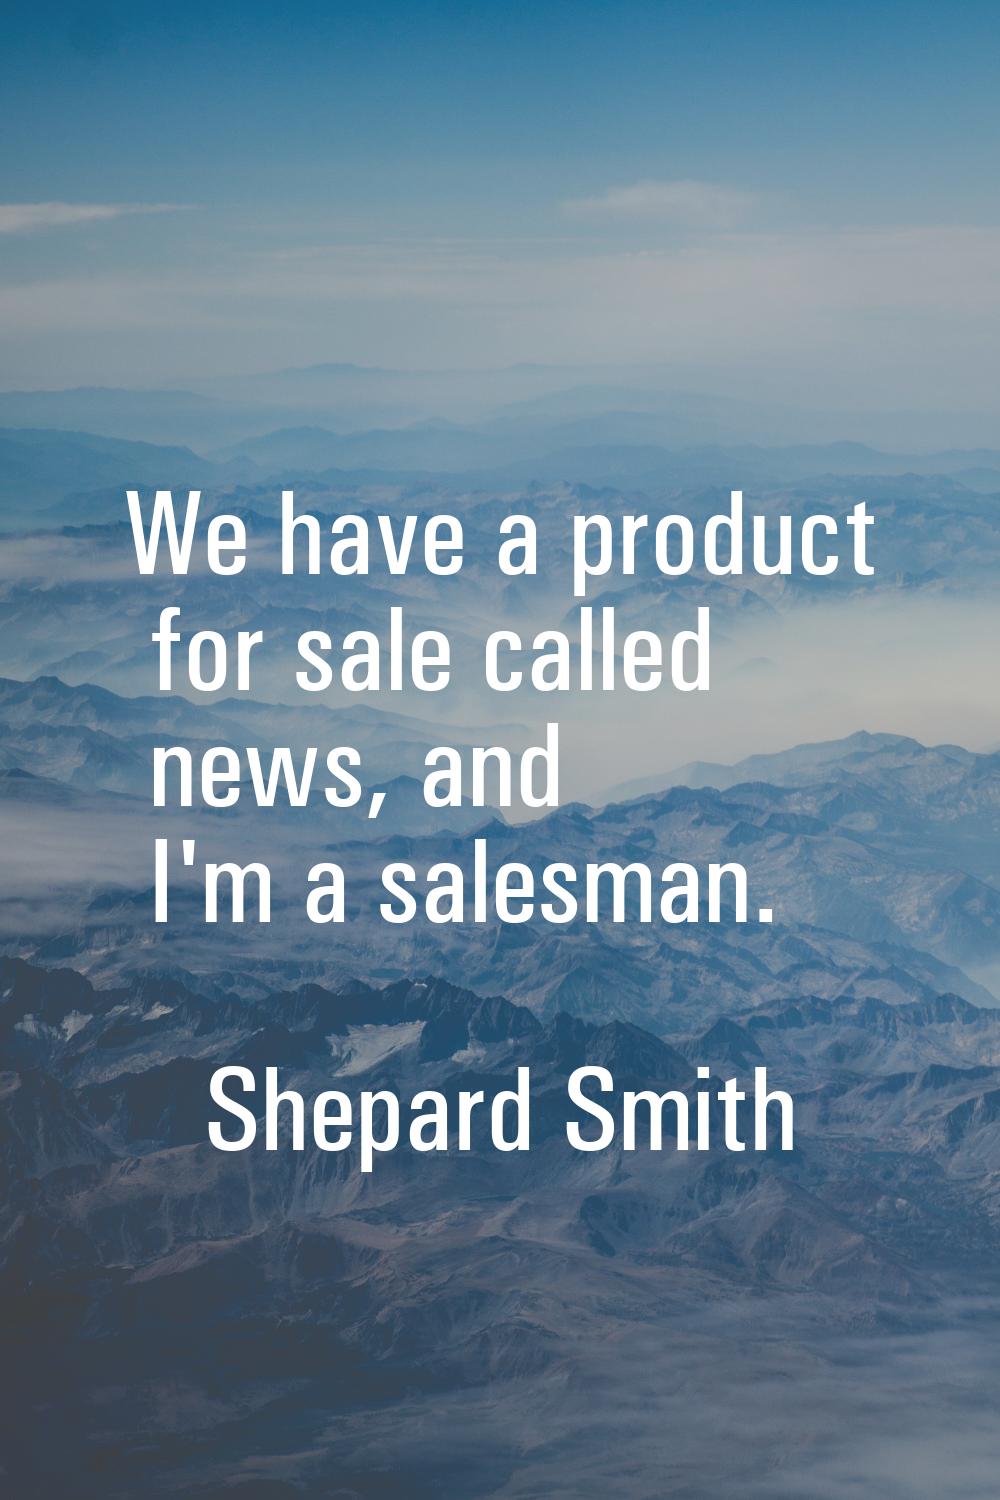 We have a product for sale called news, and I'm a salesman.